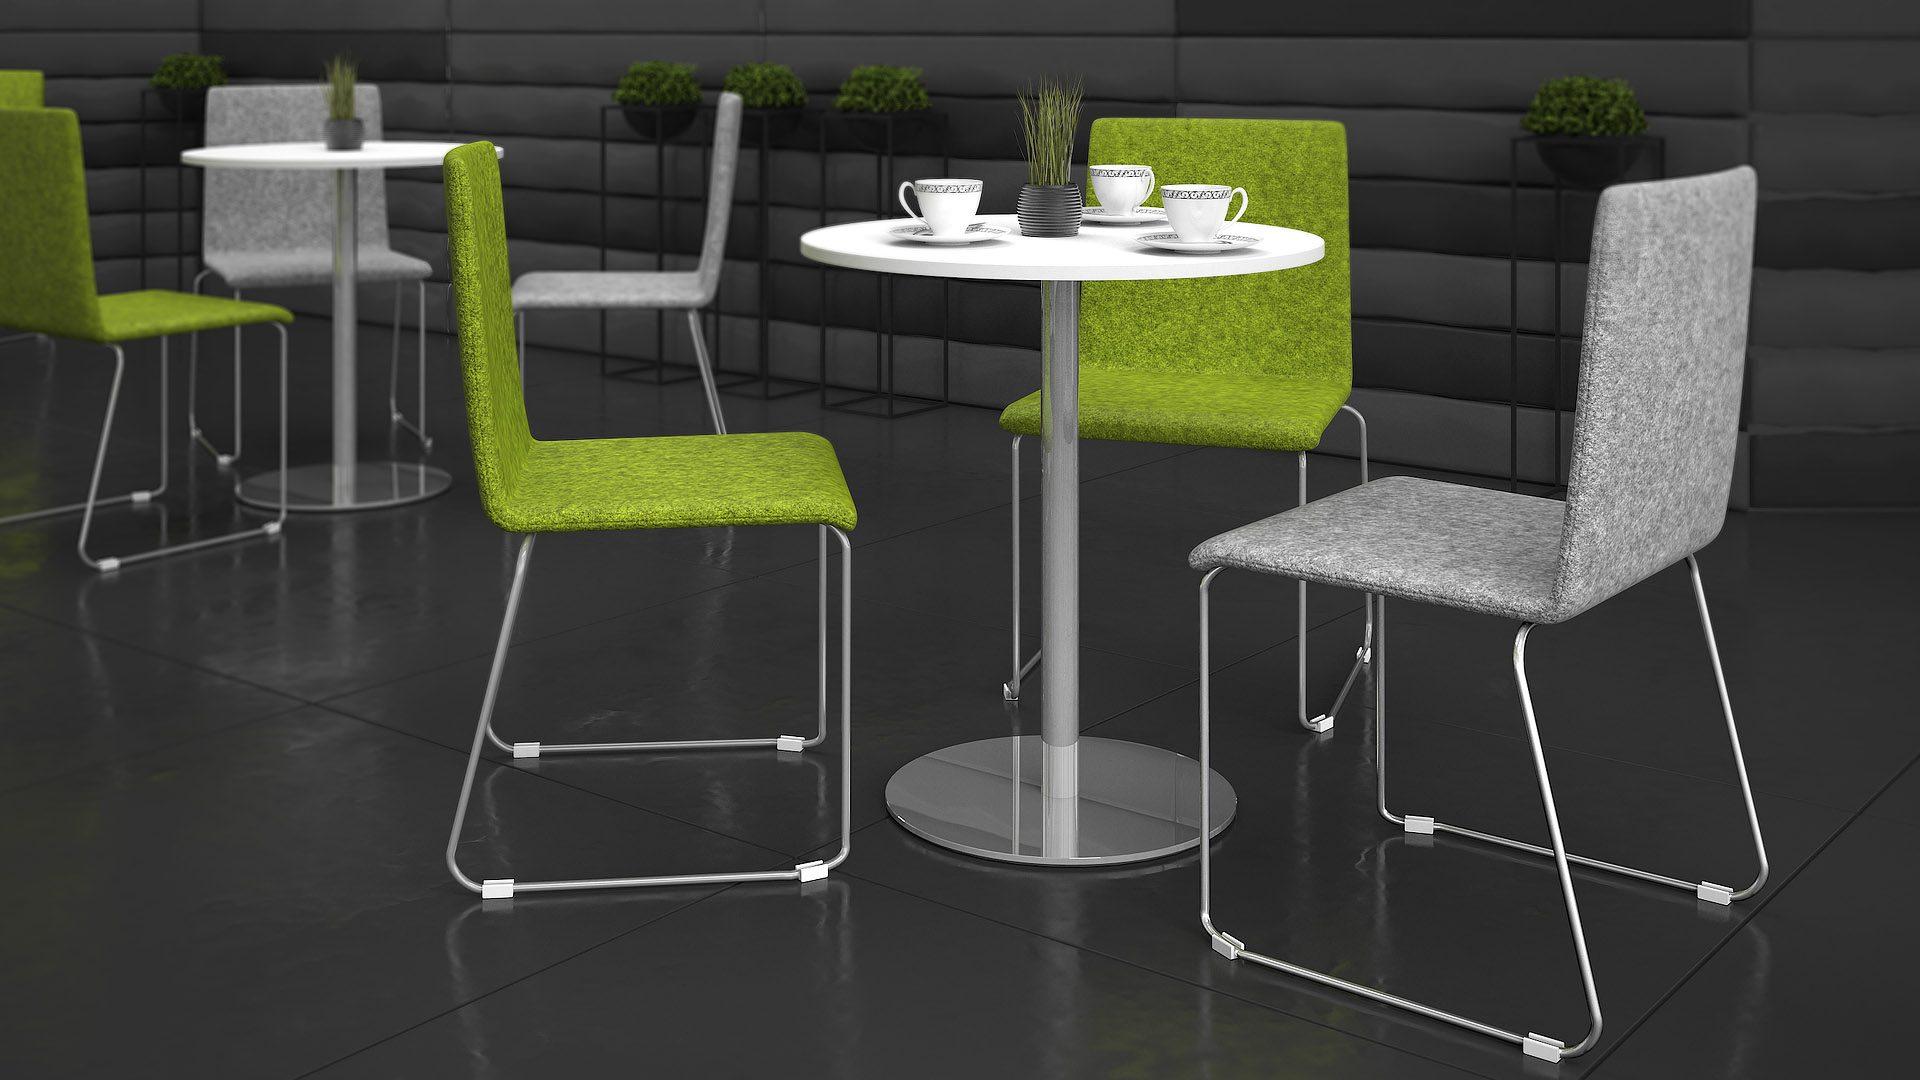 Sito coffee table is an excellent choice for reception and relaxation areas as well as informal meetings